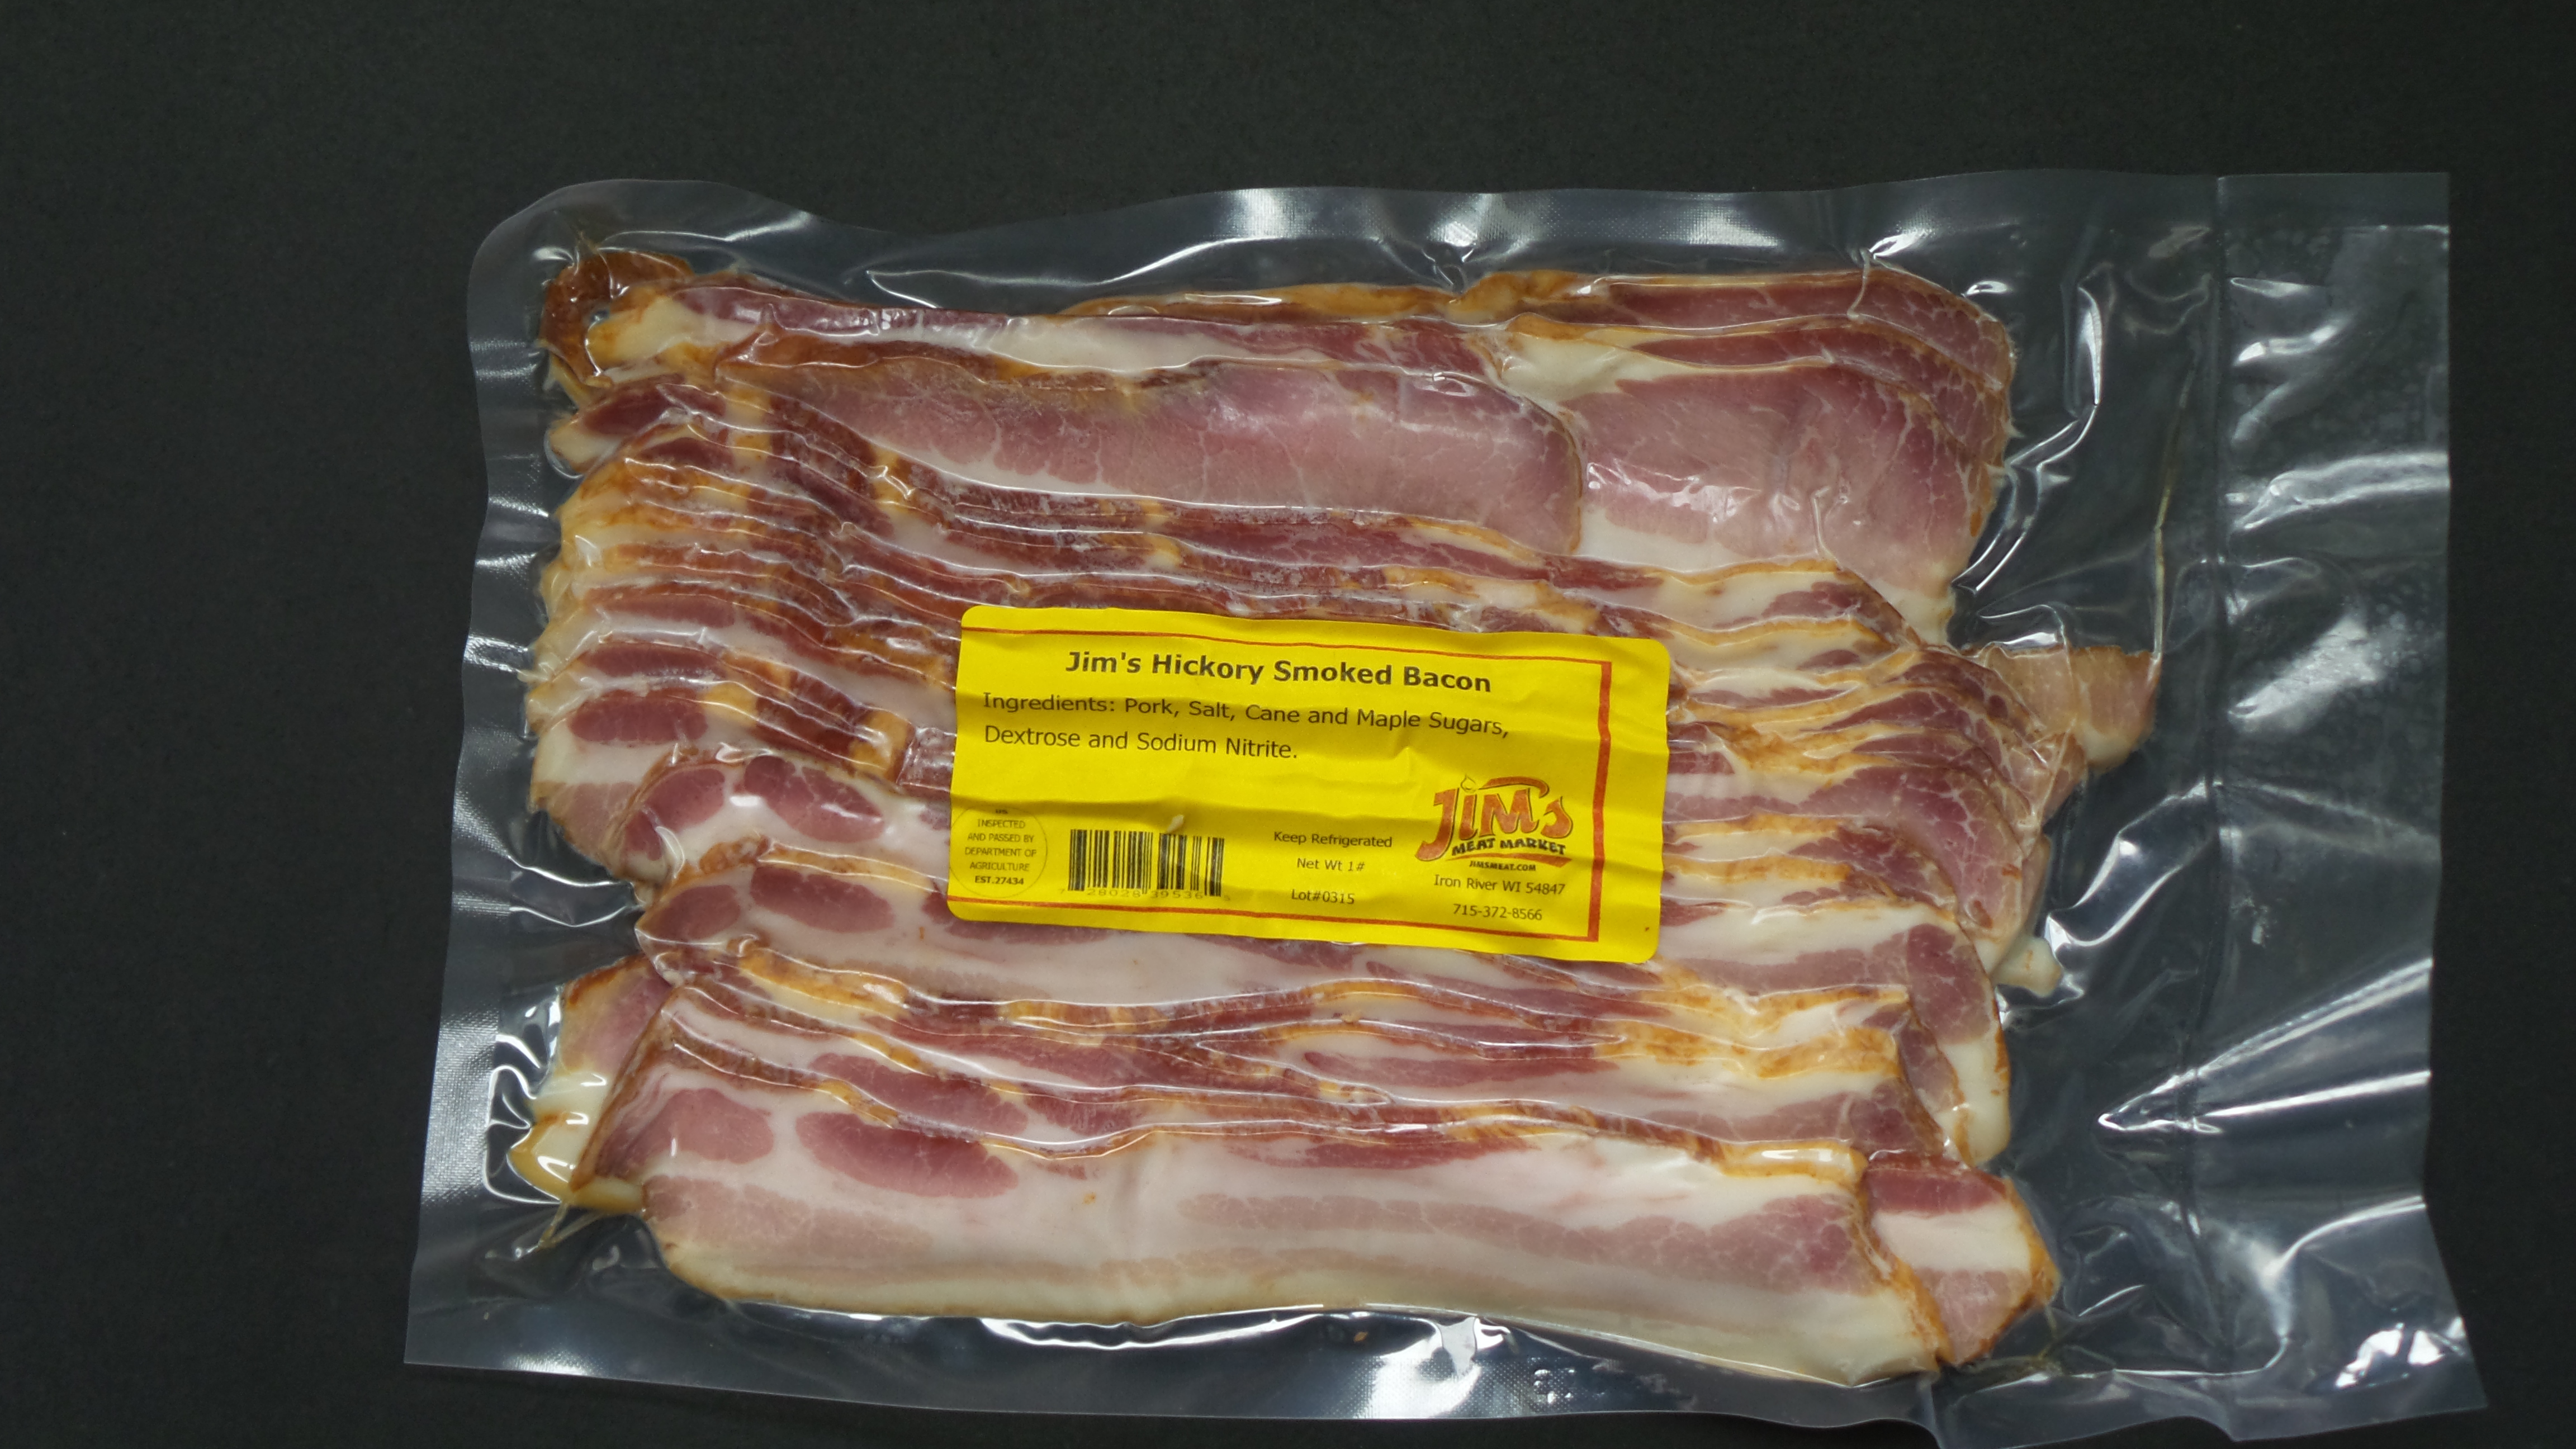 Jim's Hickory Smoked Bacon – Jim's Meat Market